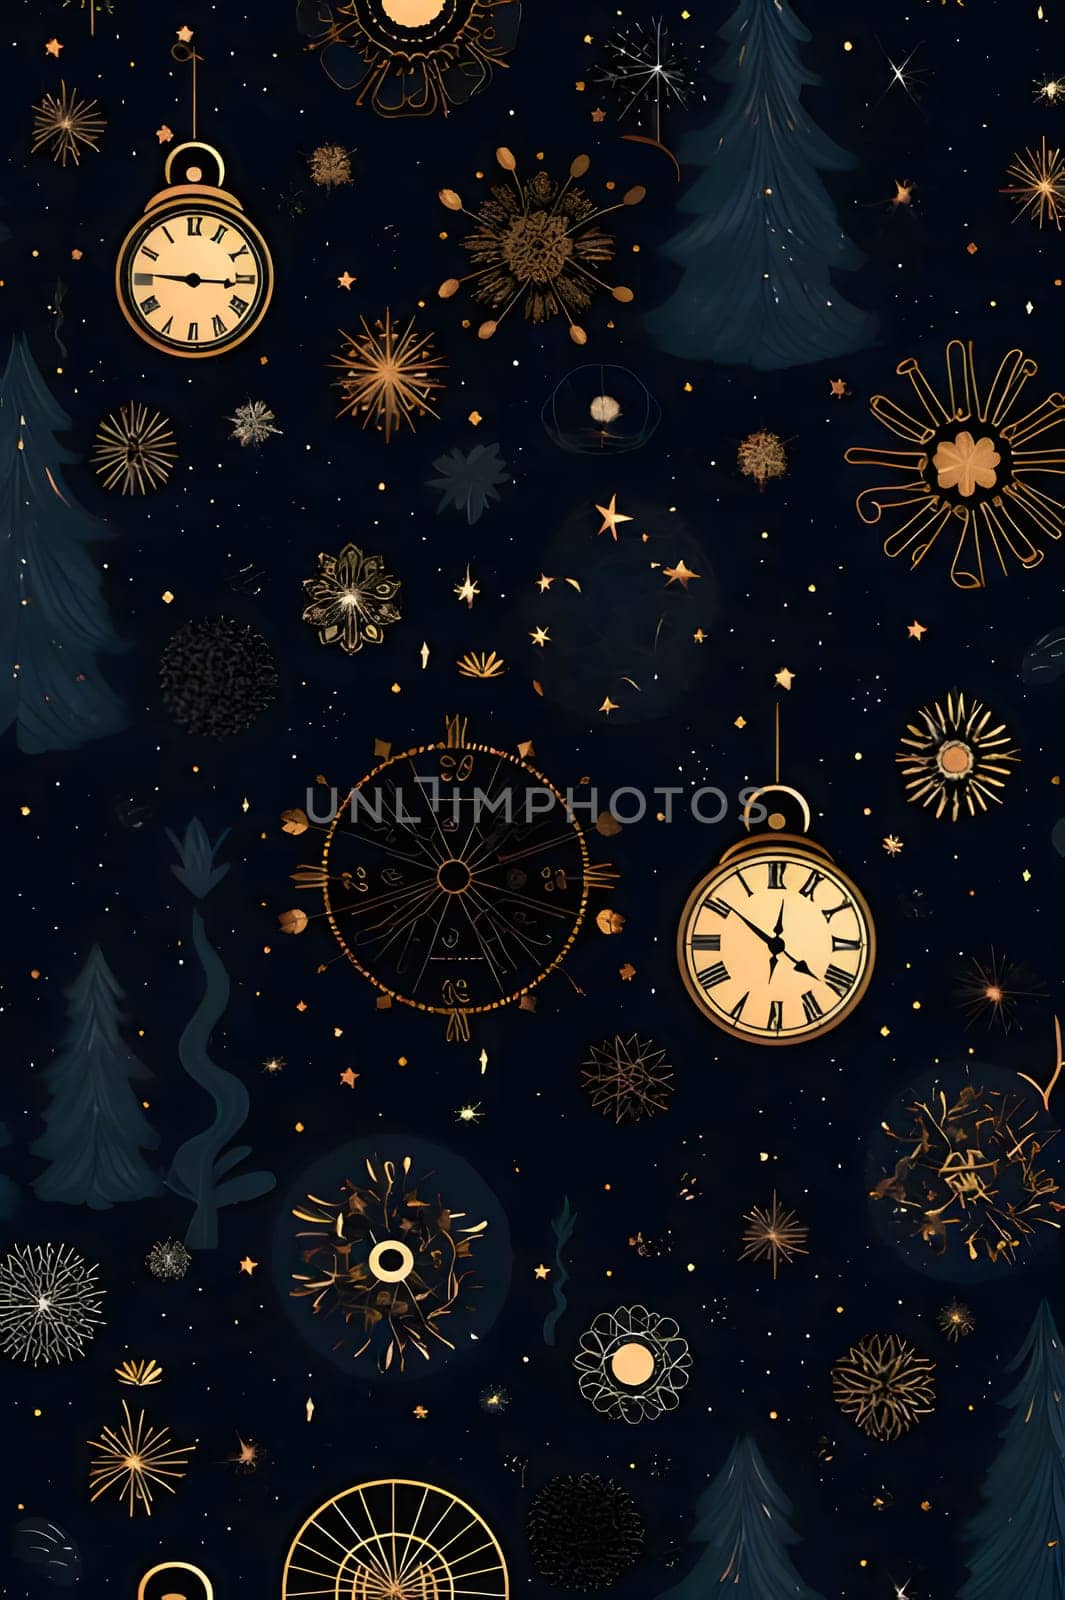 Clock faces and Christmas tree plants. as abstract background, wallpaper, banner, texture design with pattern - vector. Dark colors. by ThemesS